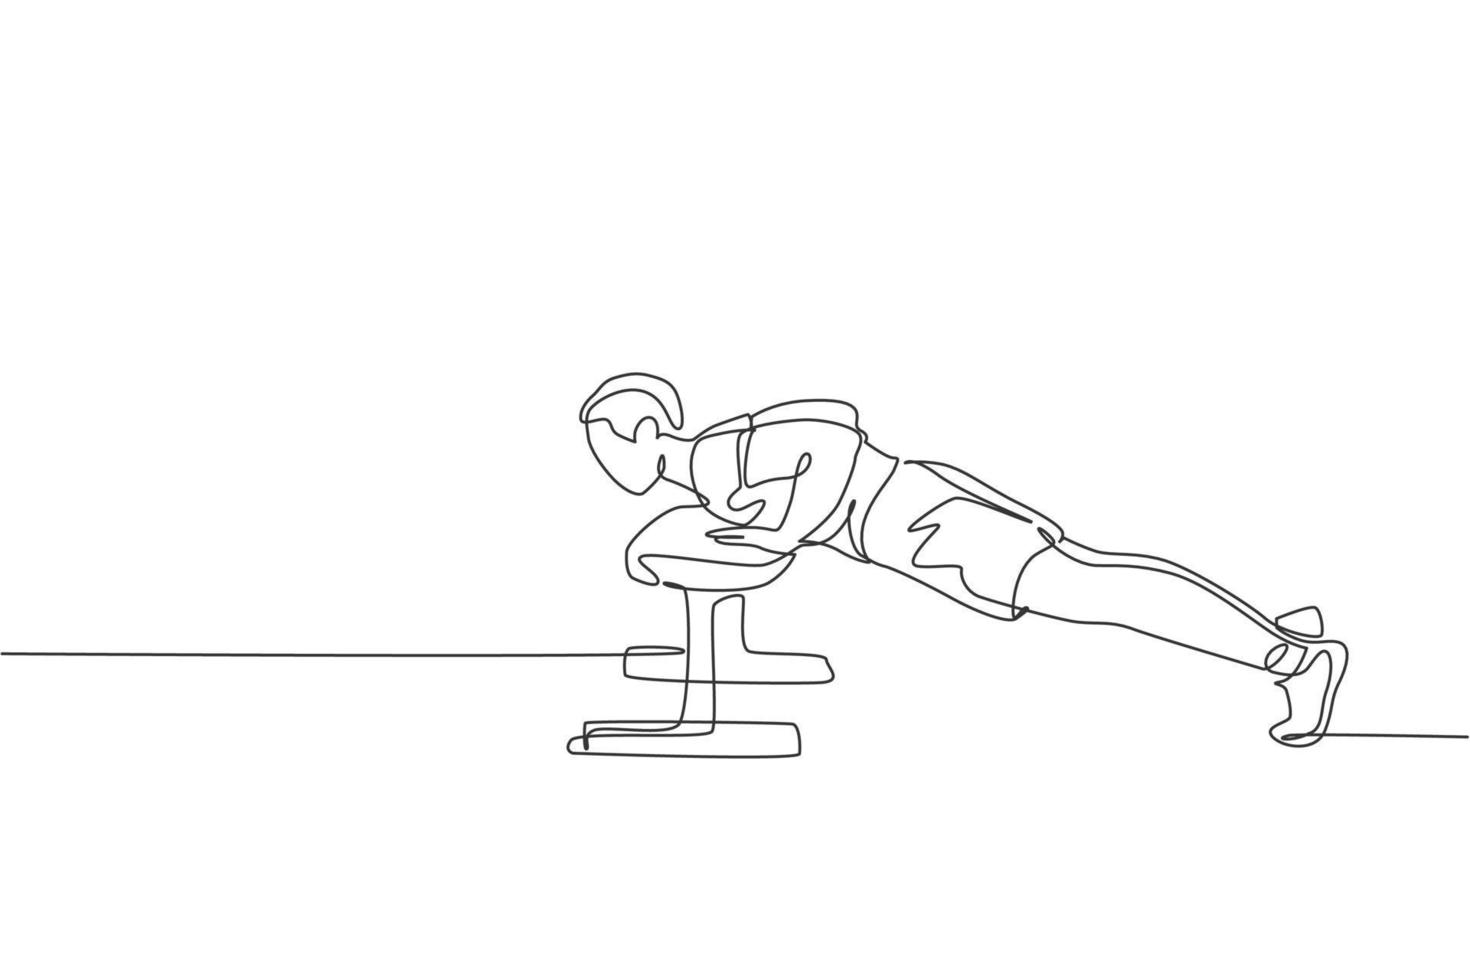 One single line drawing of young energetic man exercise push up with bench in gym fitness center graphic vector illustration. Healthy lifestyle sport concept. Modern continuous line draw design